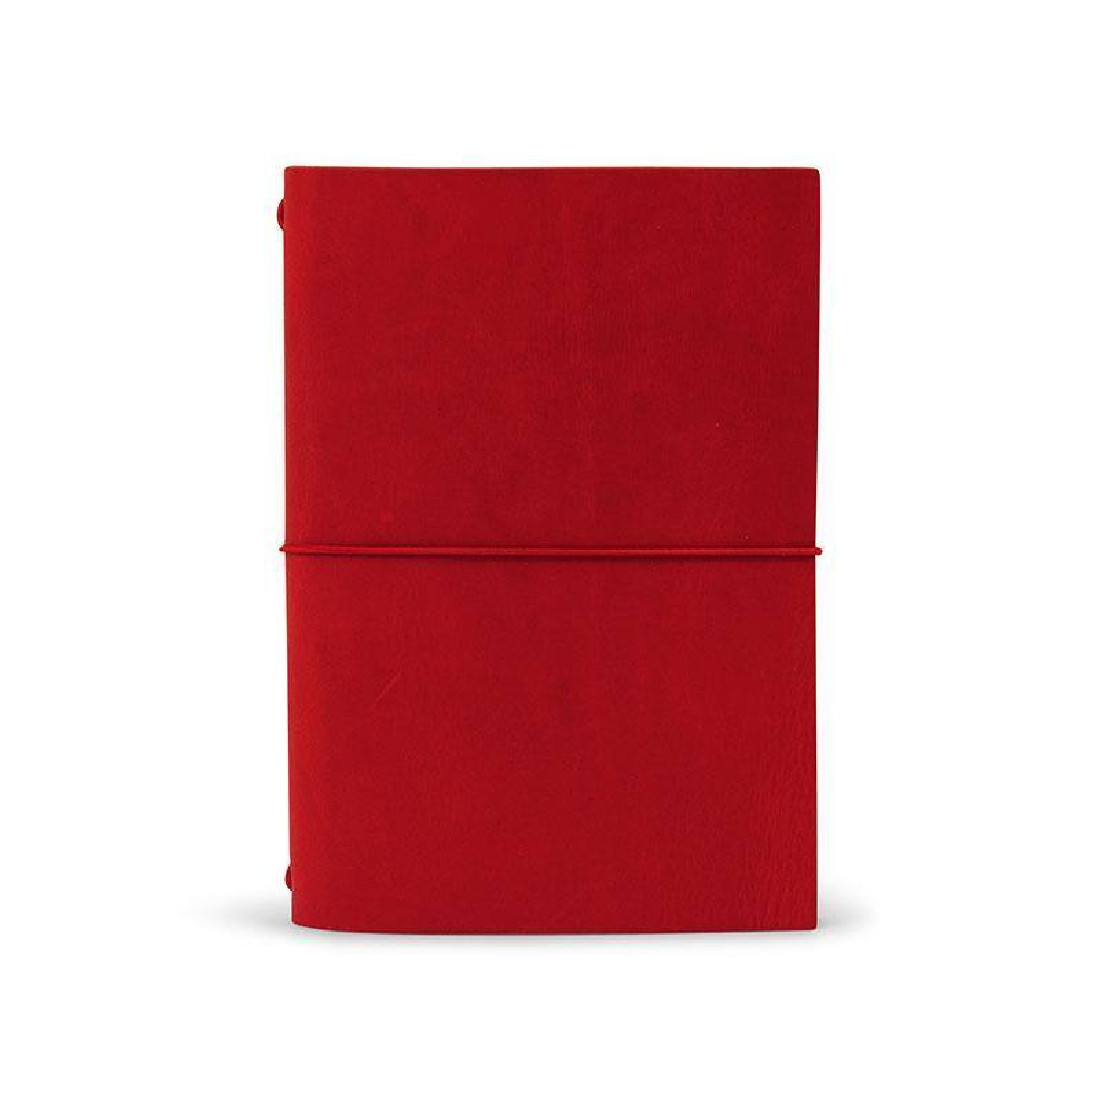 Paper Republic grand voyageur pocket red leather journal